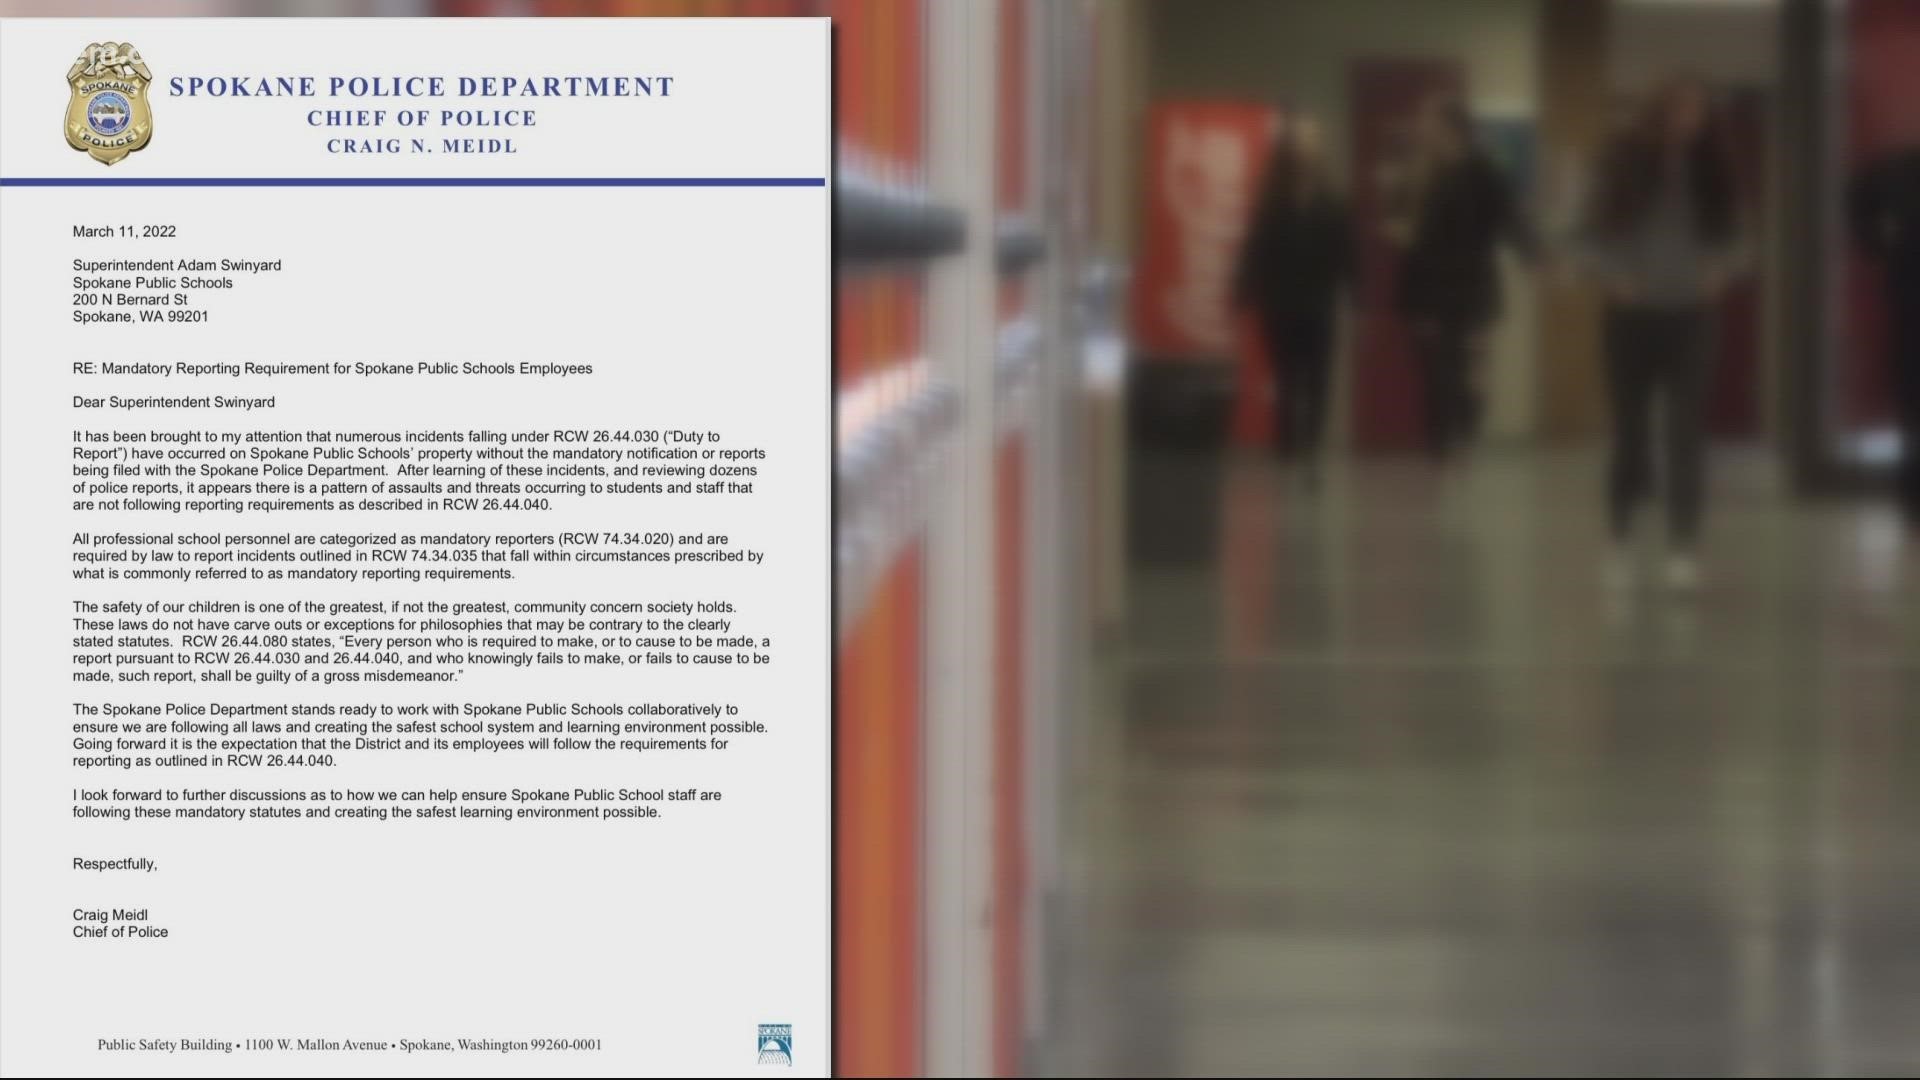 The department alleges that the school district failed numerous times to report a "pattern of assaults and threats" on students and staff.